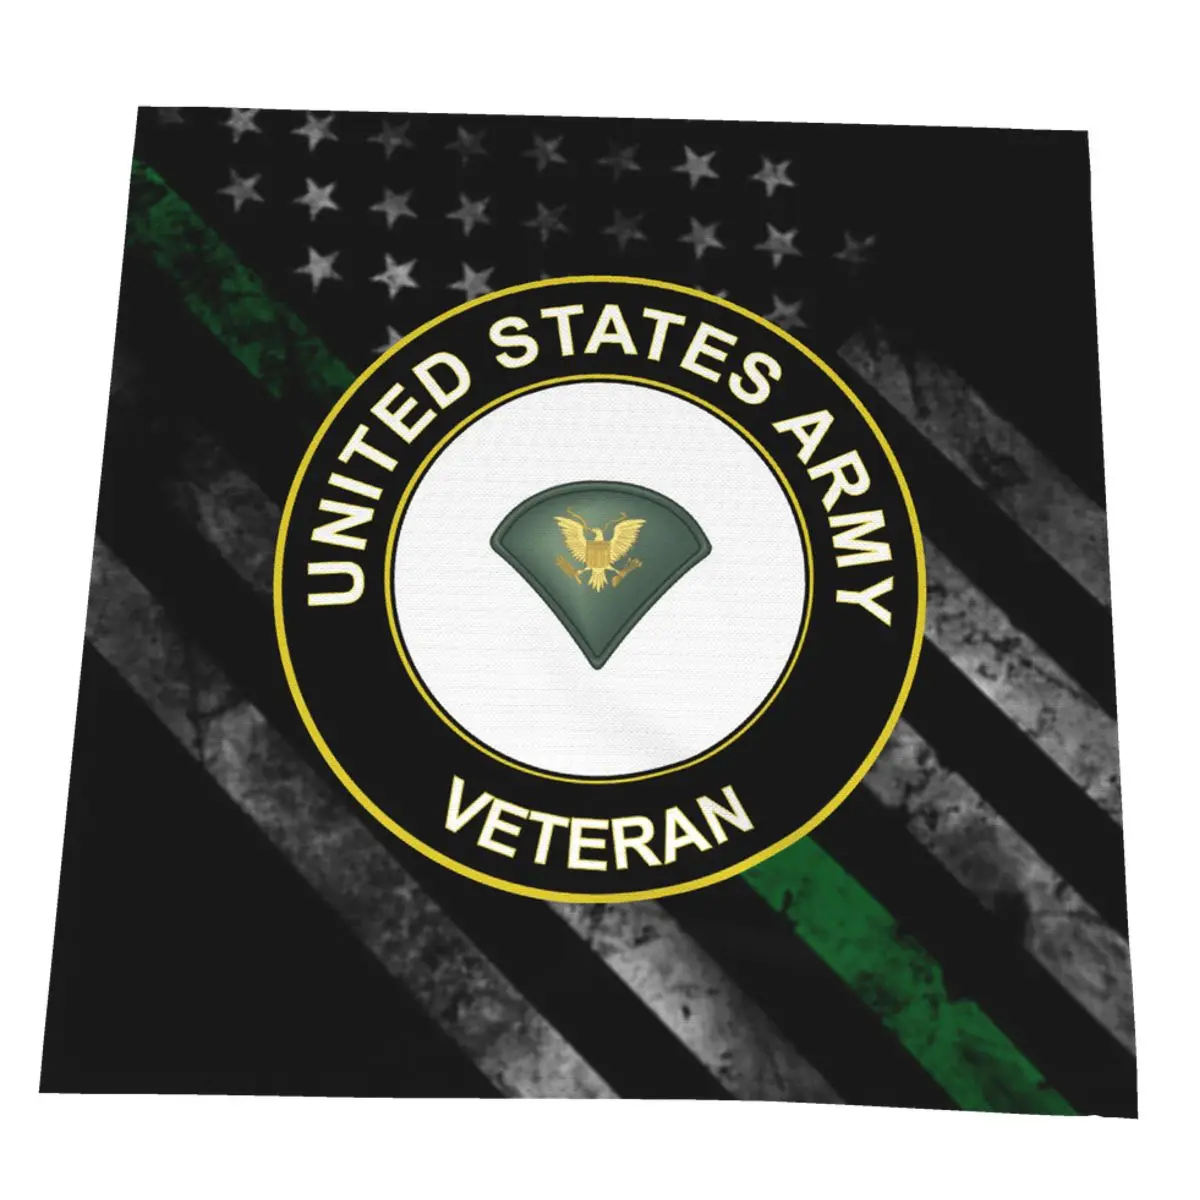 

US Army Specialist Veteran Napkin For Party Wedding Table Cloth Linen Cotton Available Restaurant Dinner 50x50cm Premium Hotel